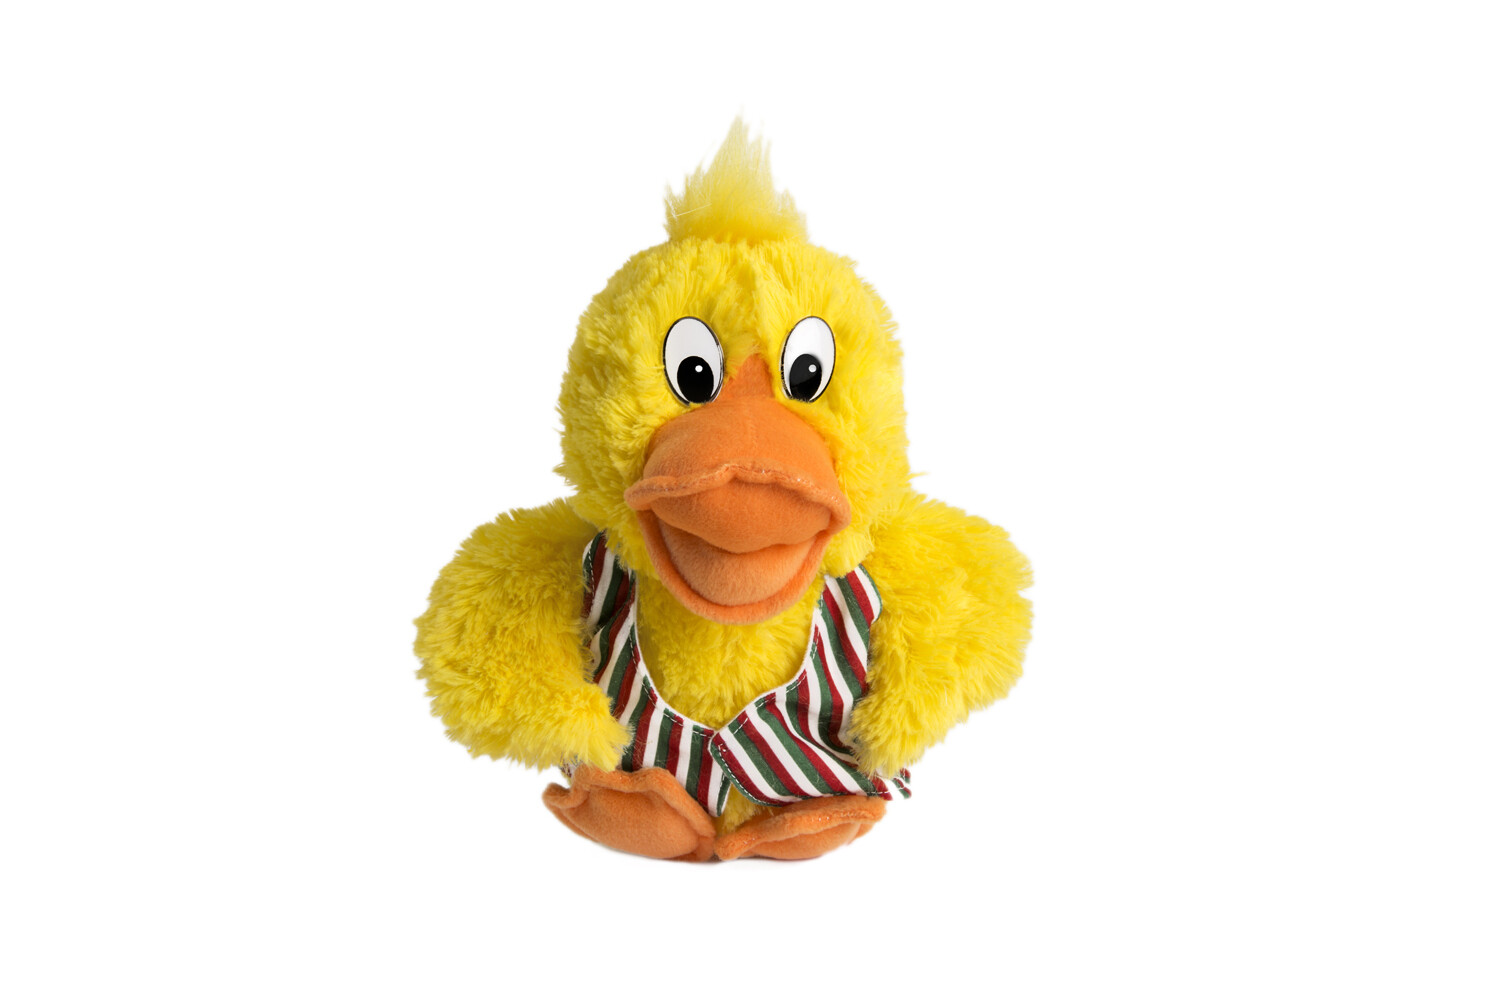 EASTER DEALS! Buy a disco duck soft toy and receive a Wakey Wakey story book free!